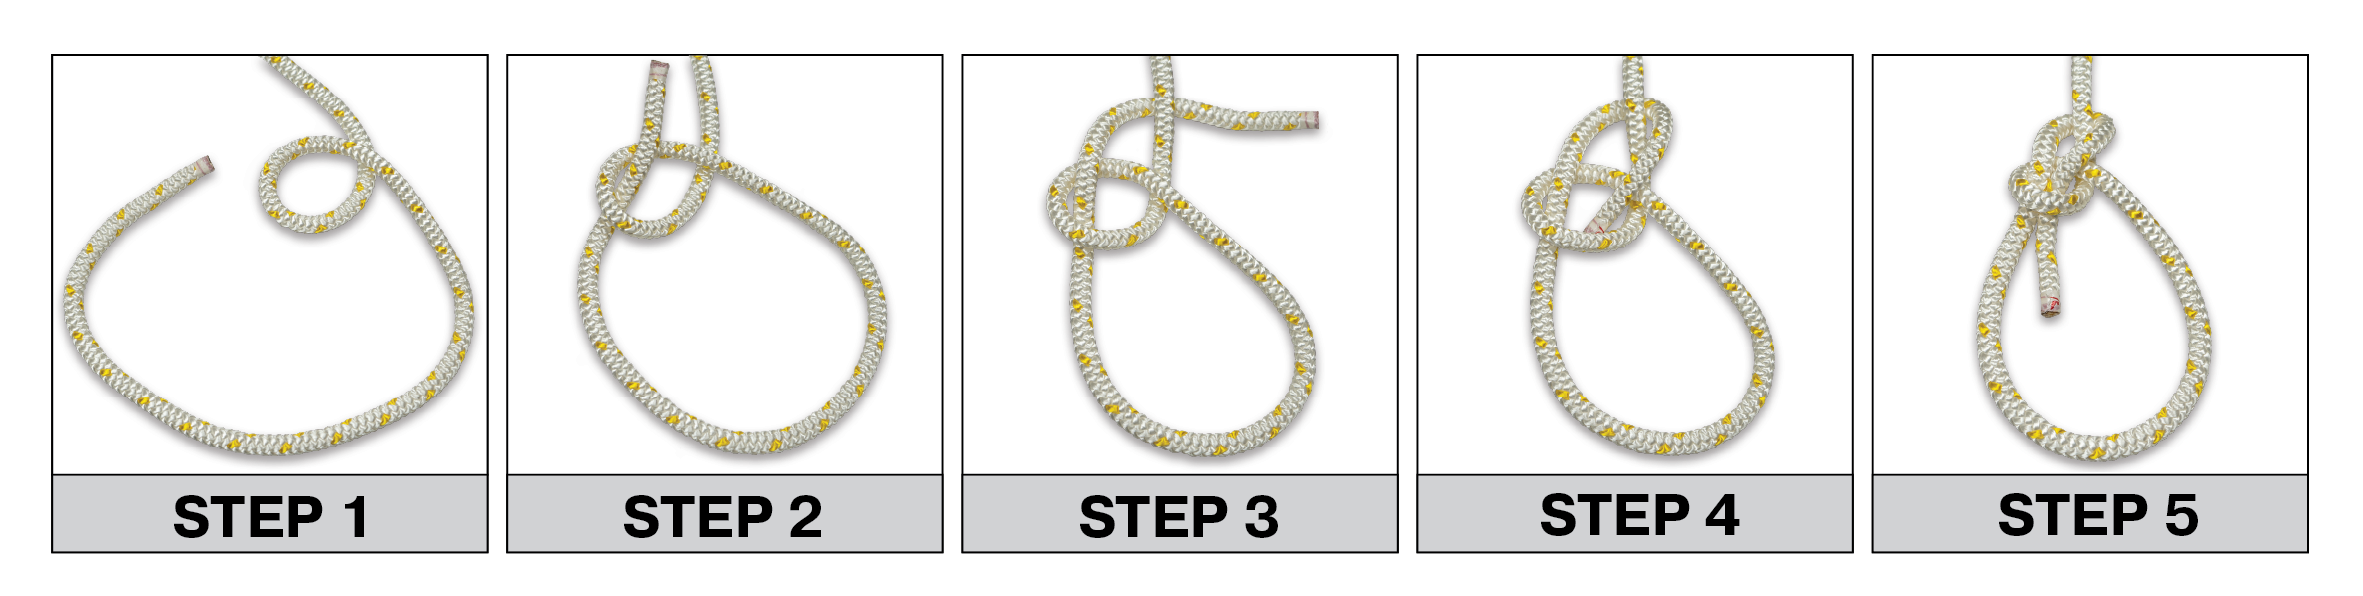 Bowline knot guide@2x